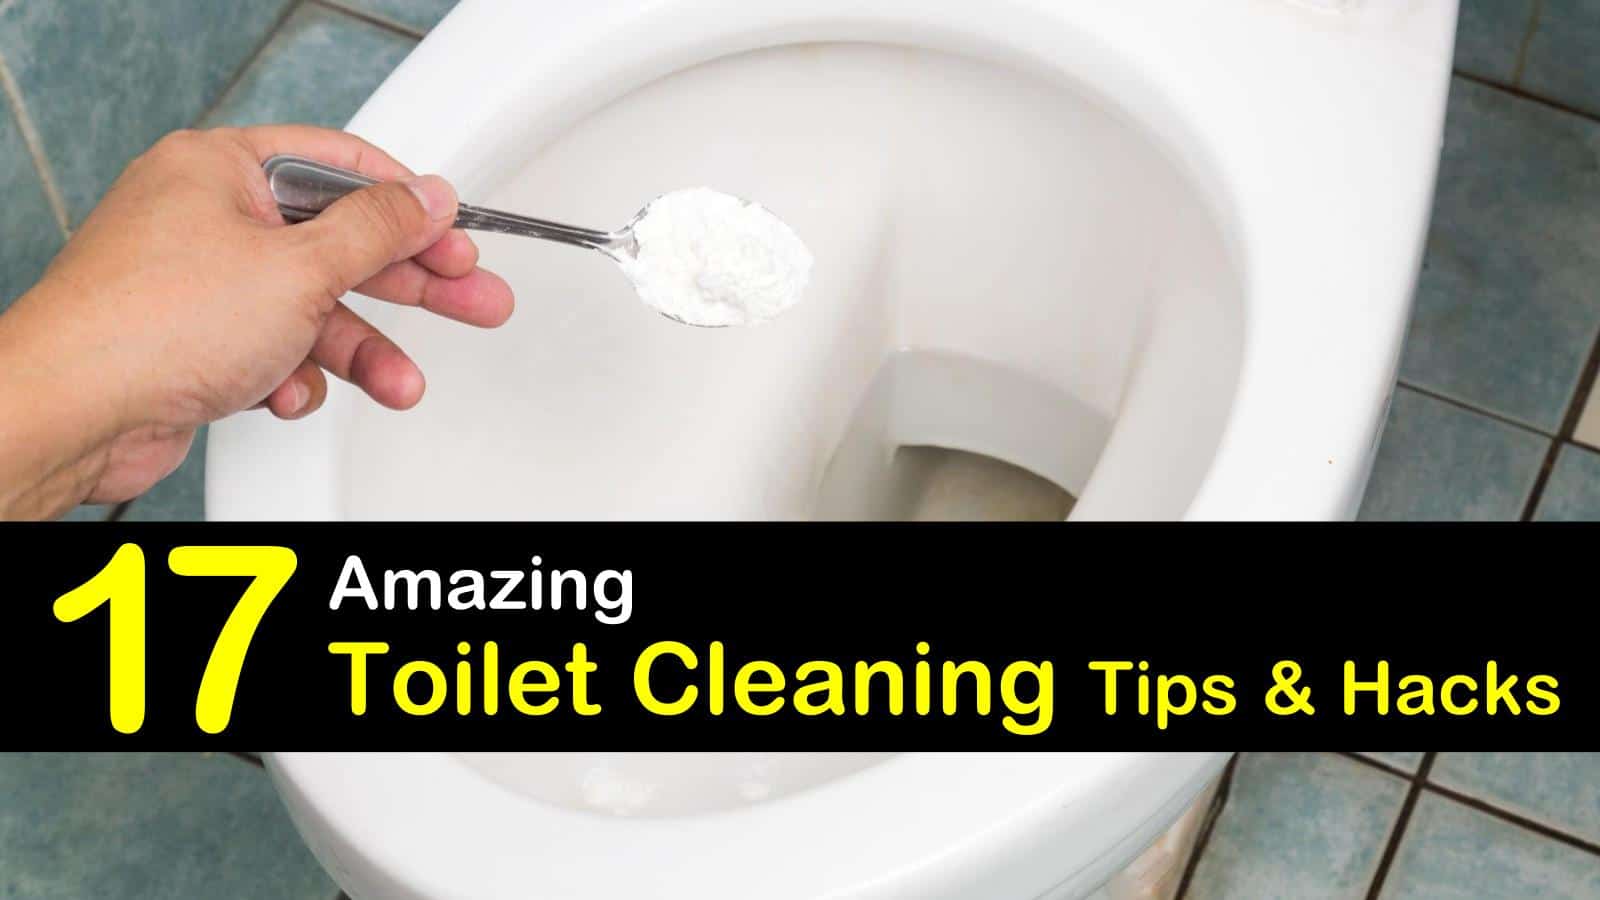 21 Amazing Ways to Clean a Toilet